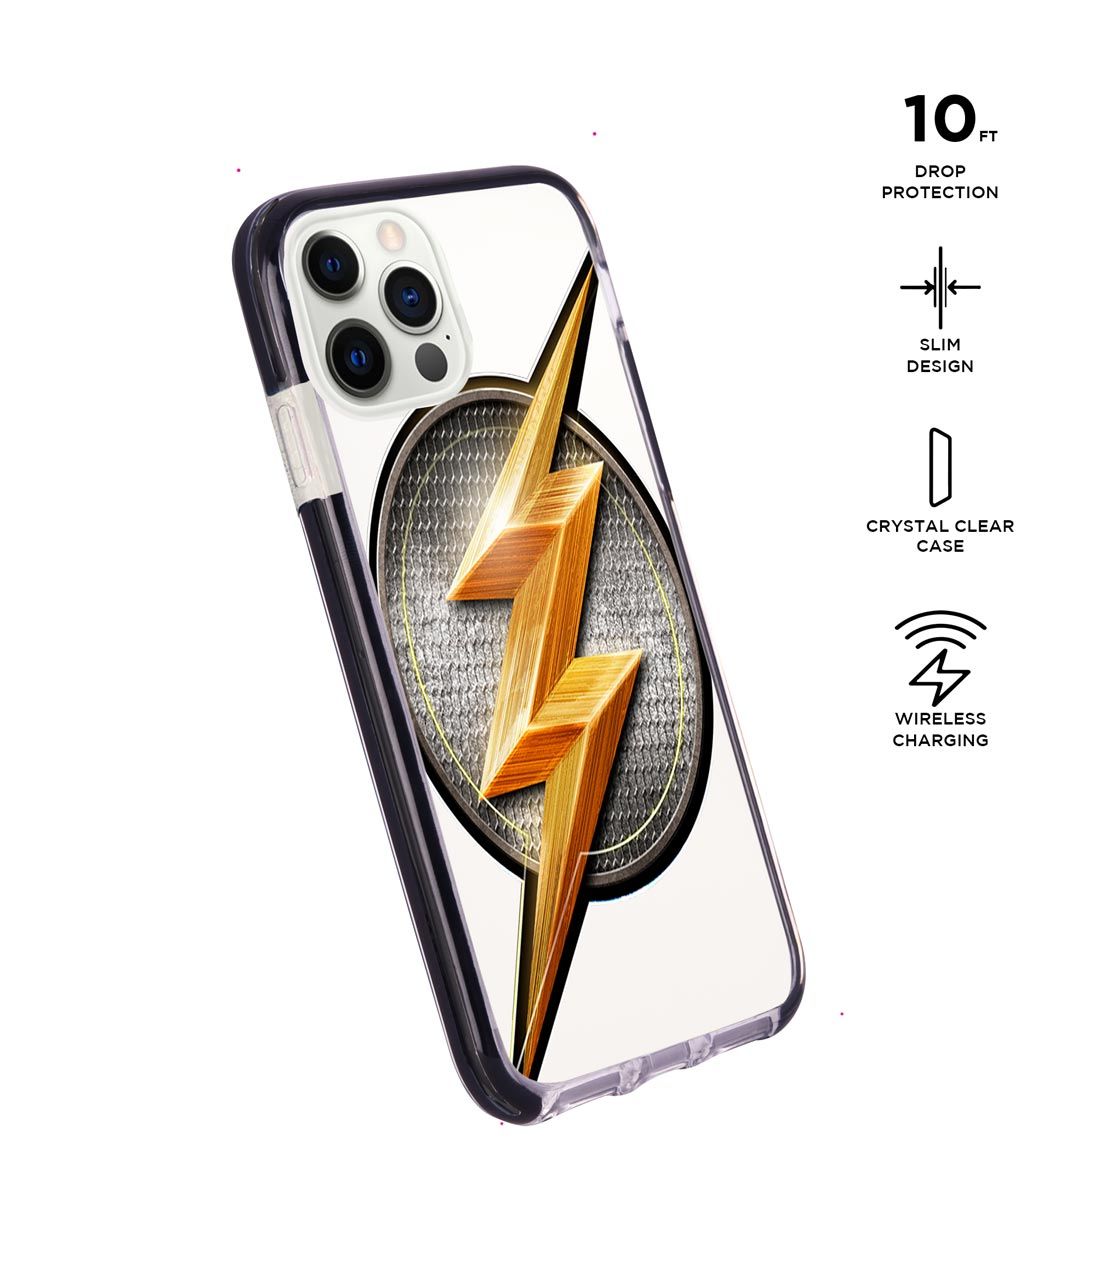 Flash Storm - Extreme Case for iPhone 12 Pro Max